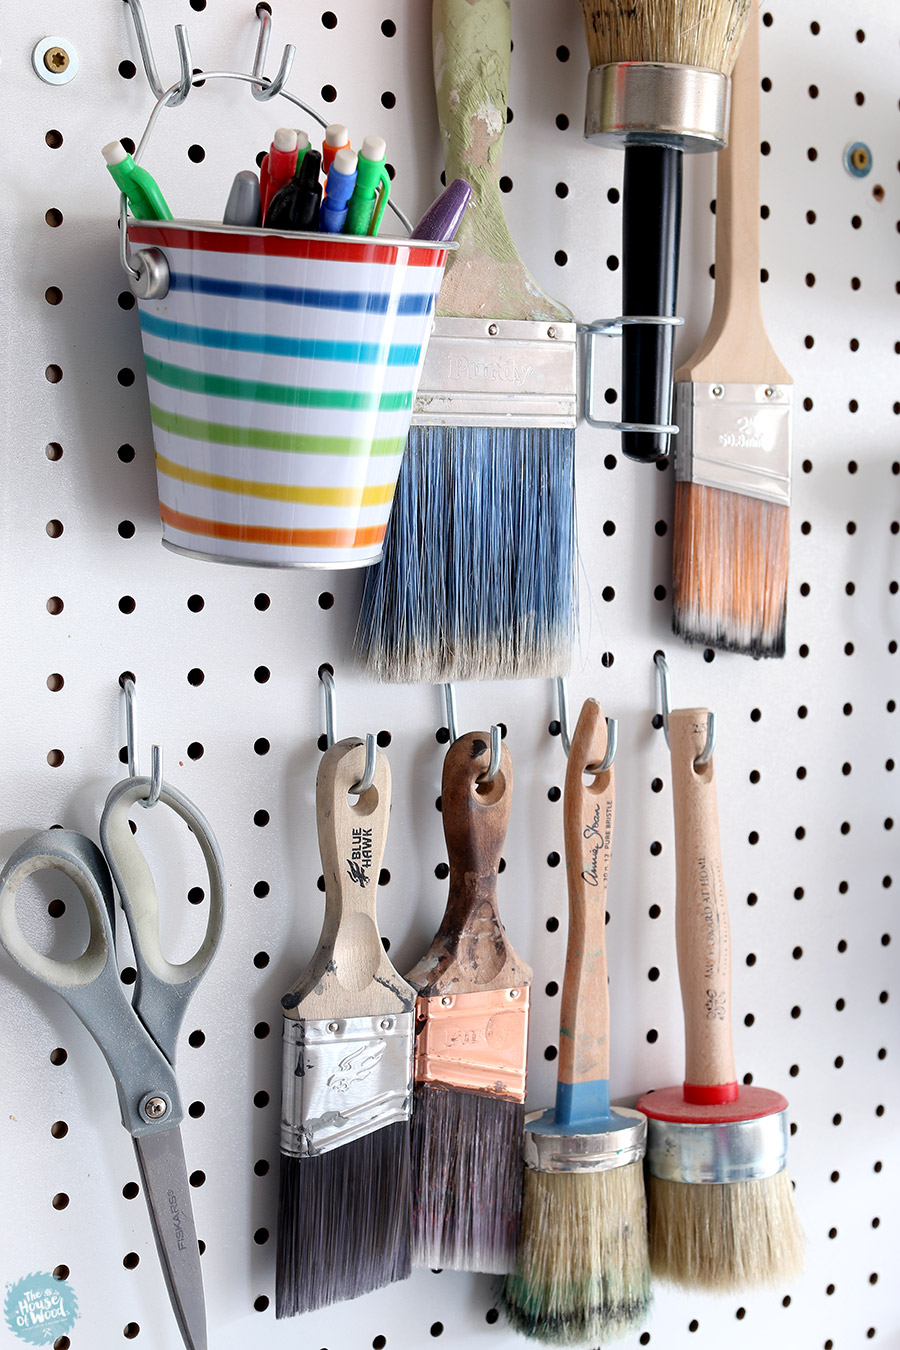 Organizing tools and supplies with pegboard